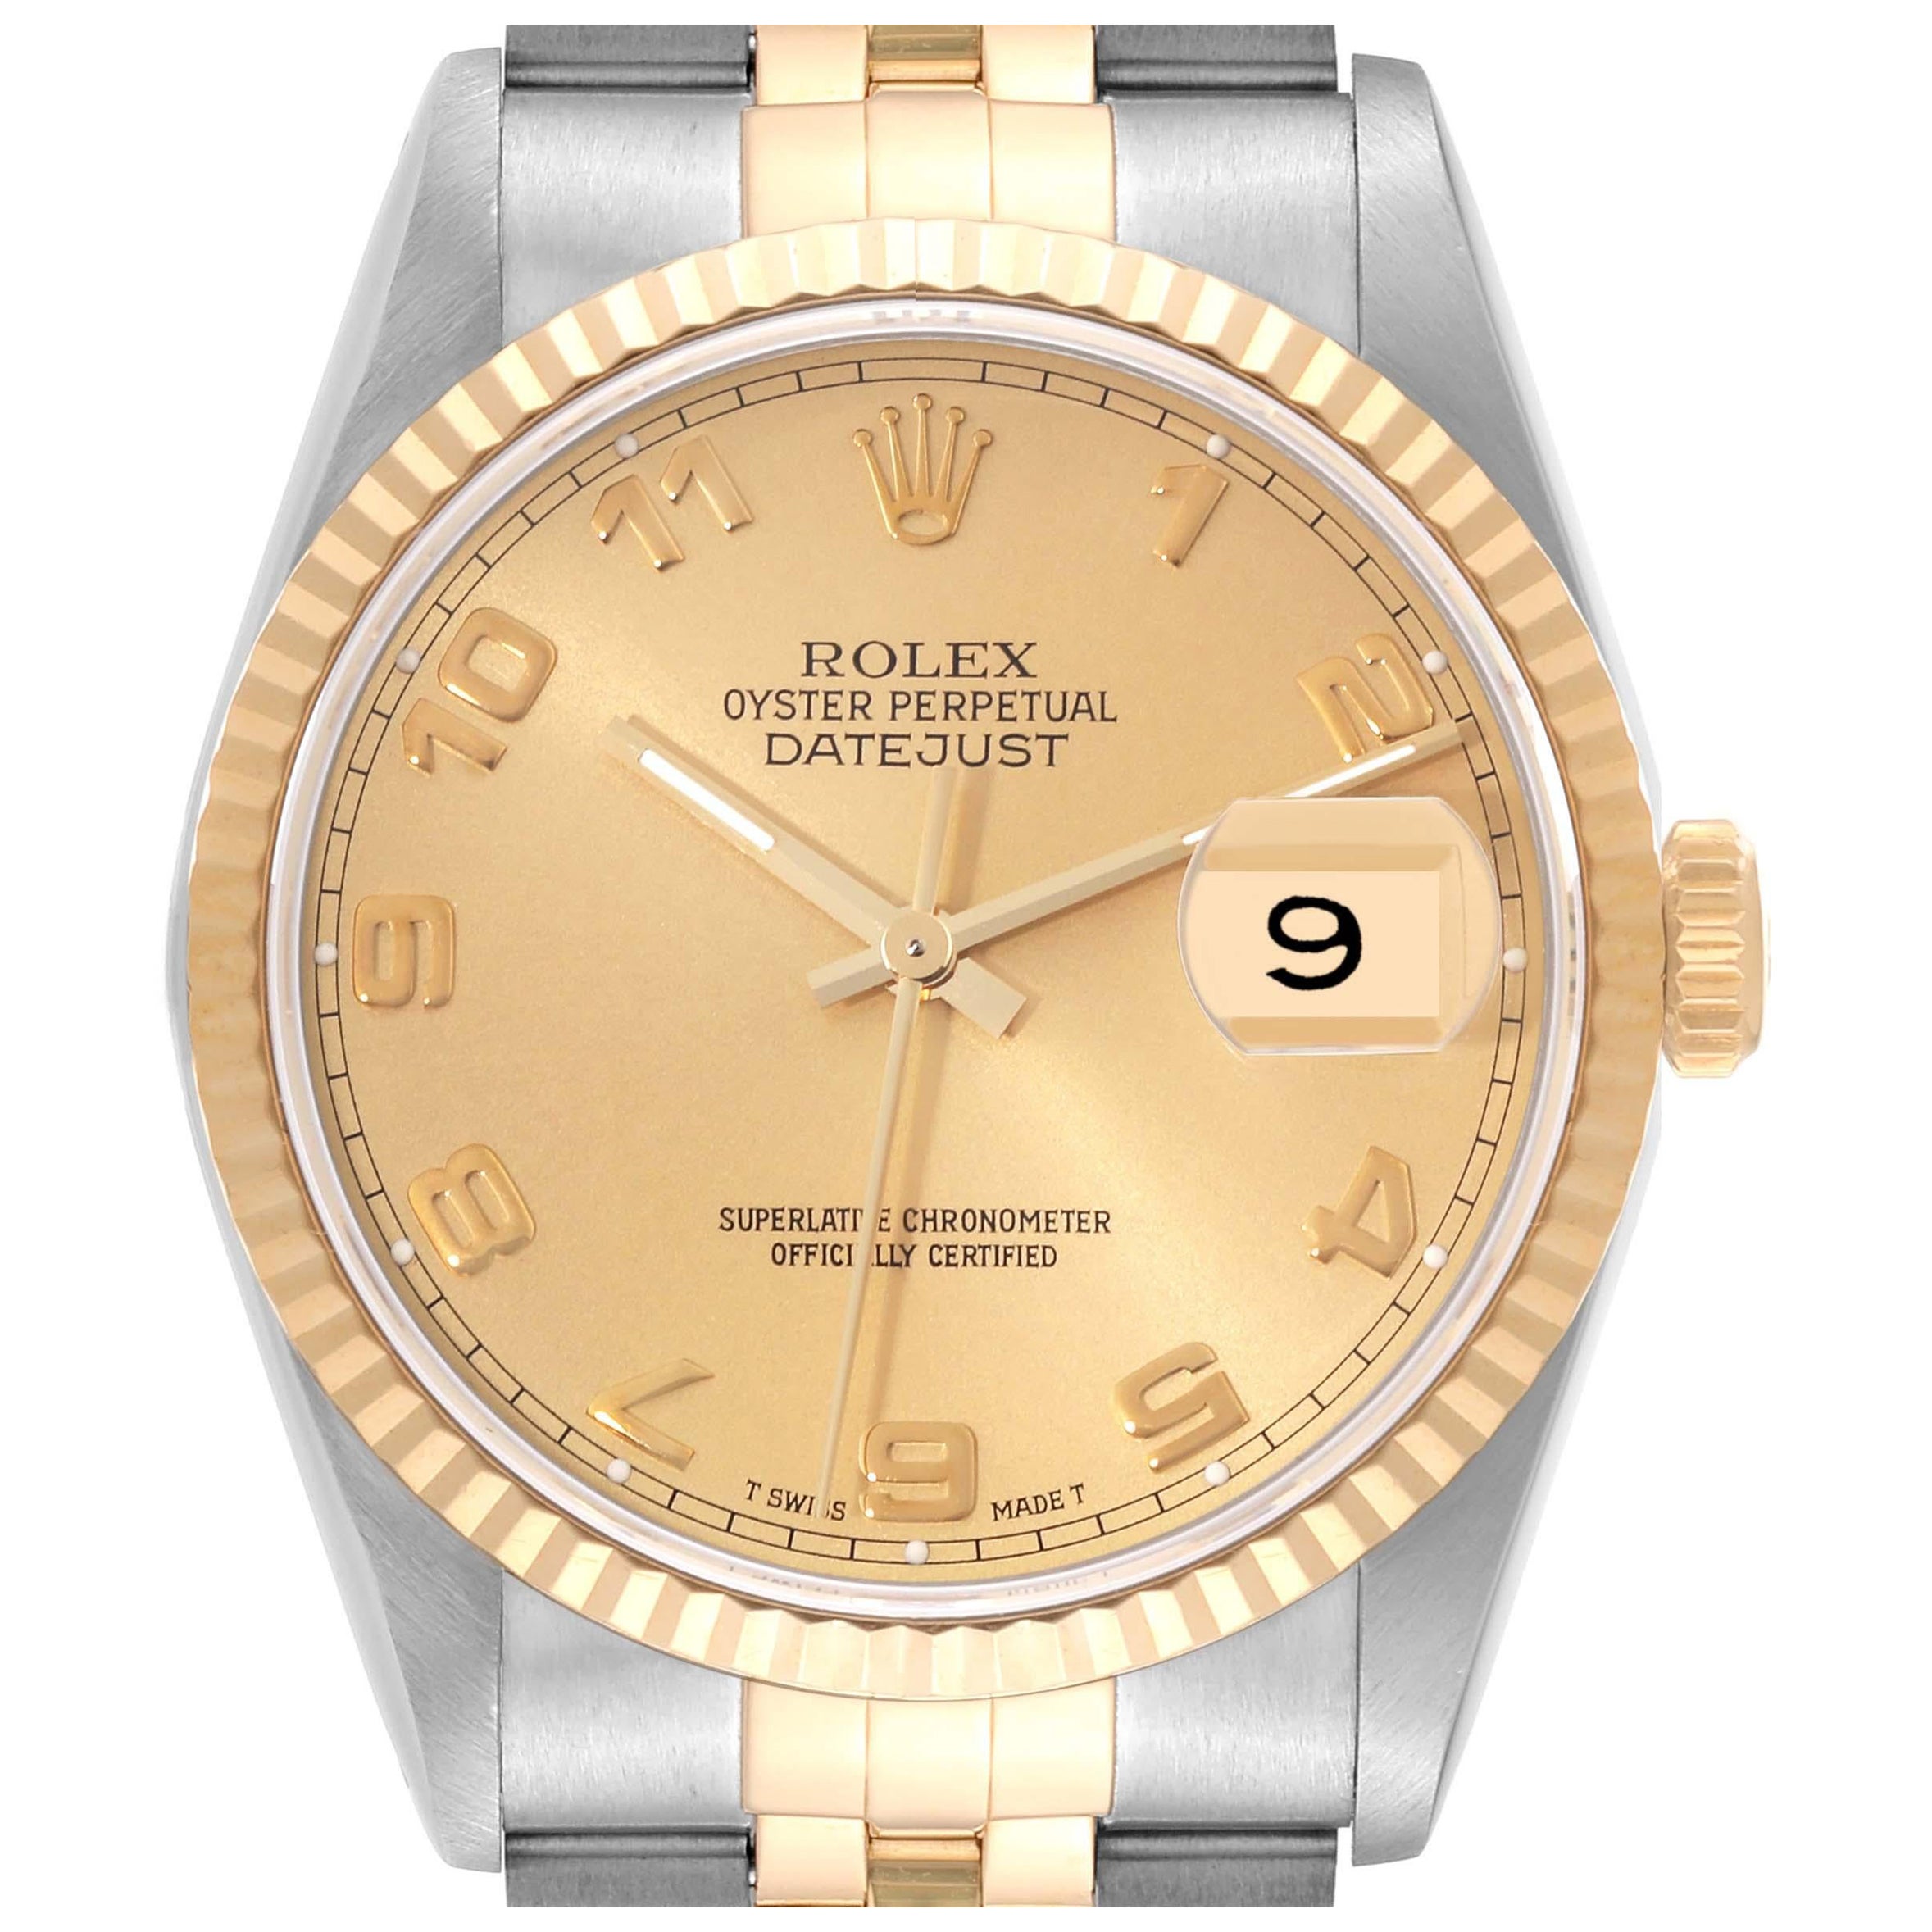 Rolex Datejust Steel Yellow Gold Champagne Arabic Dial Watch 16233 Box Papers For Sale